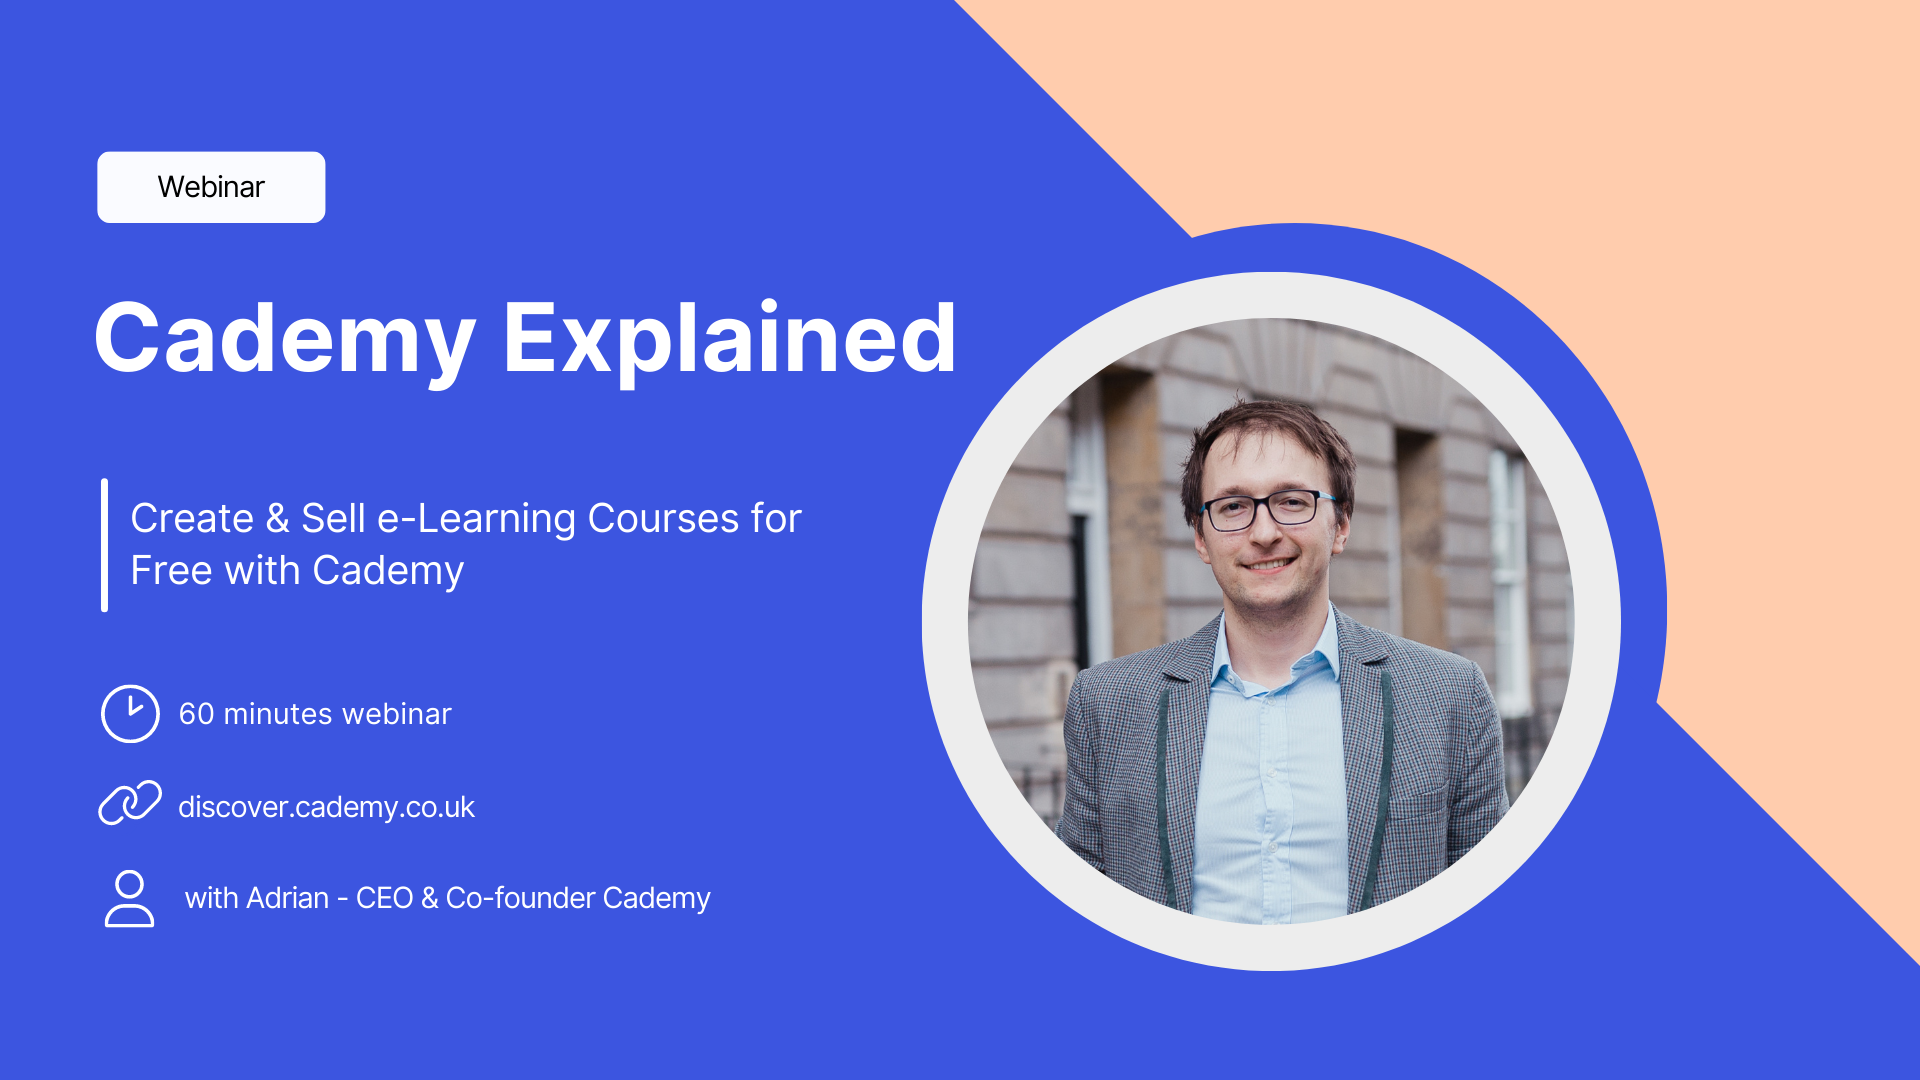 Create & Sell e-Learning Courses for Free with Cademy